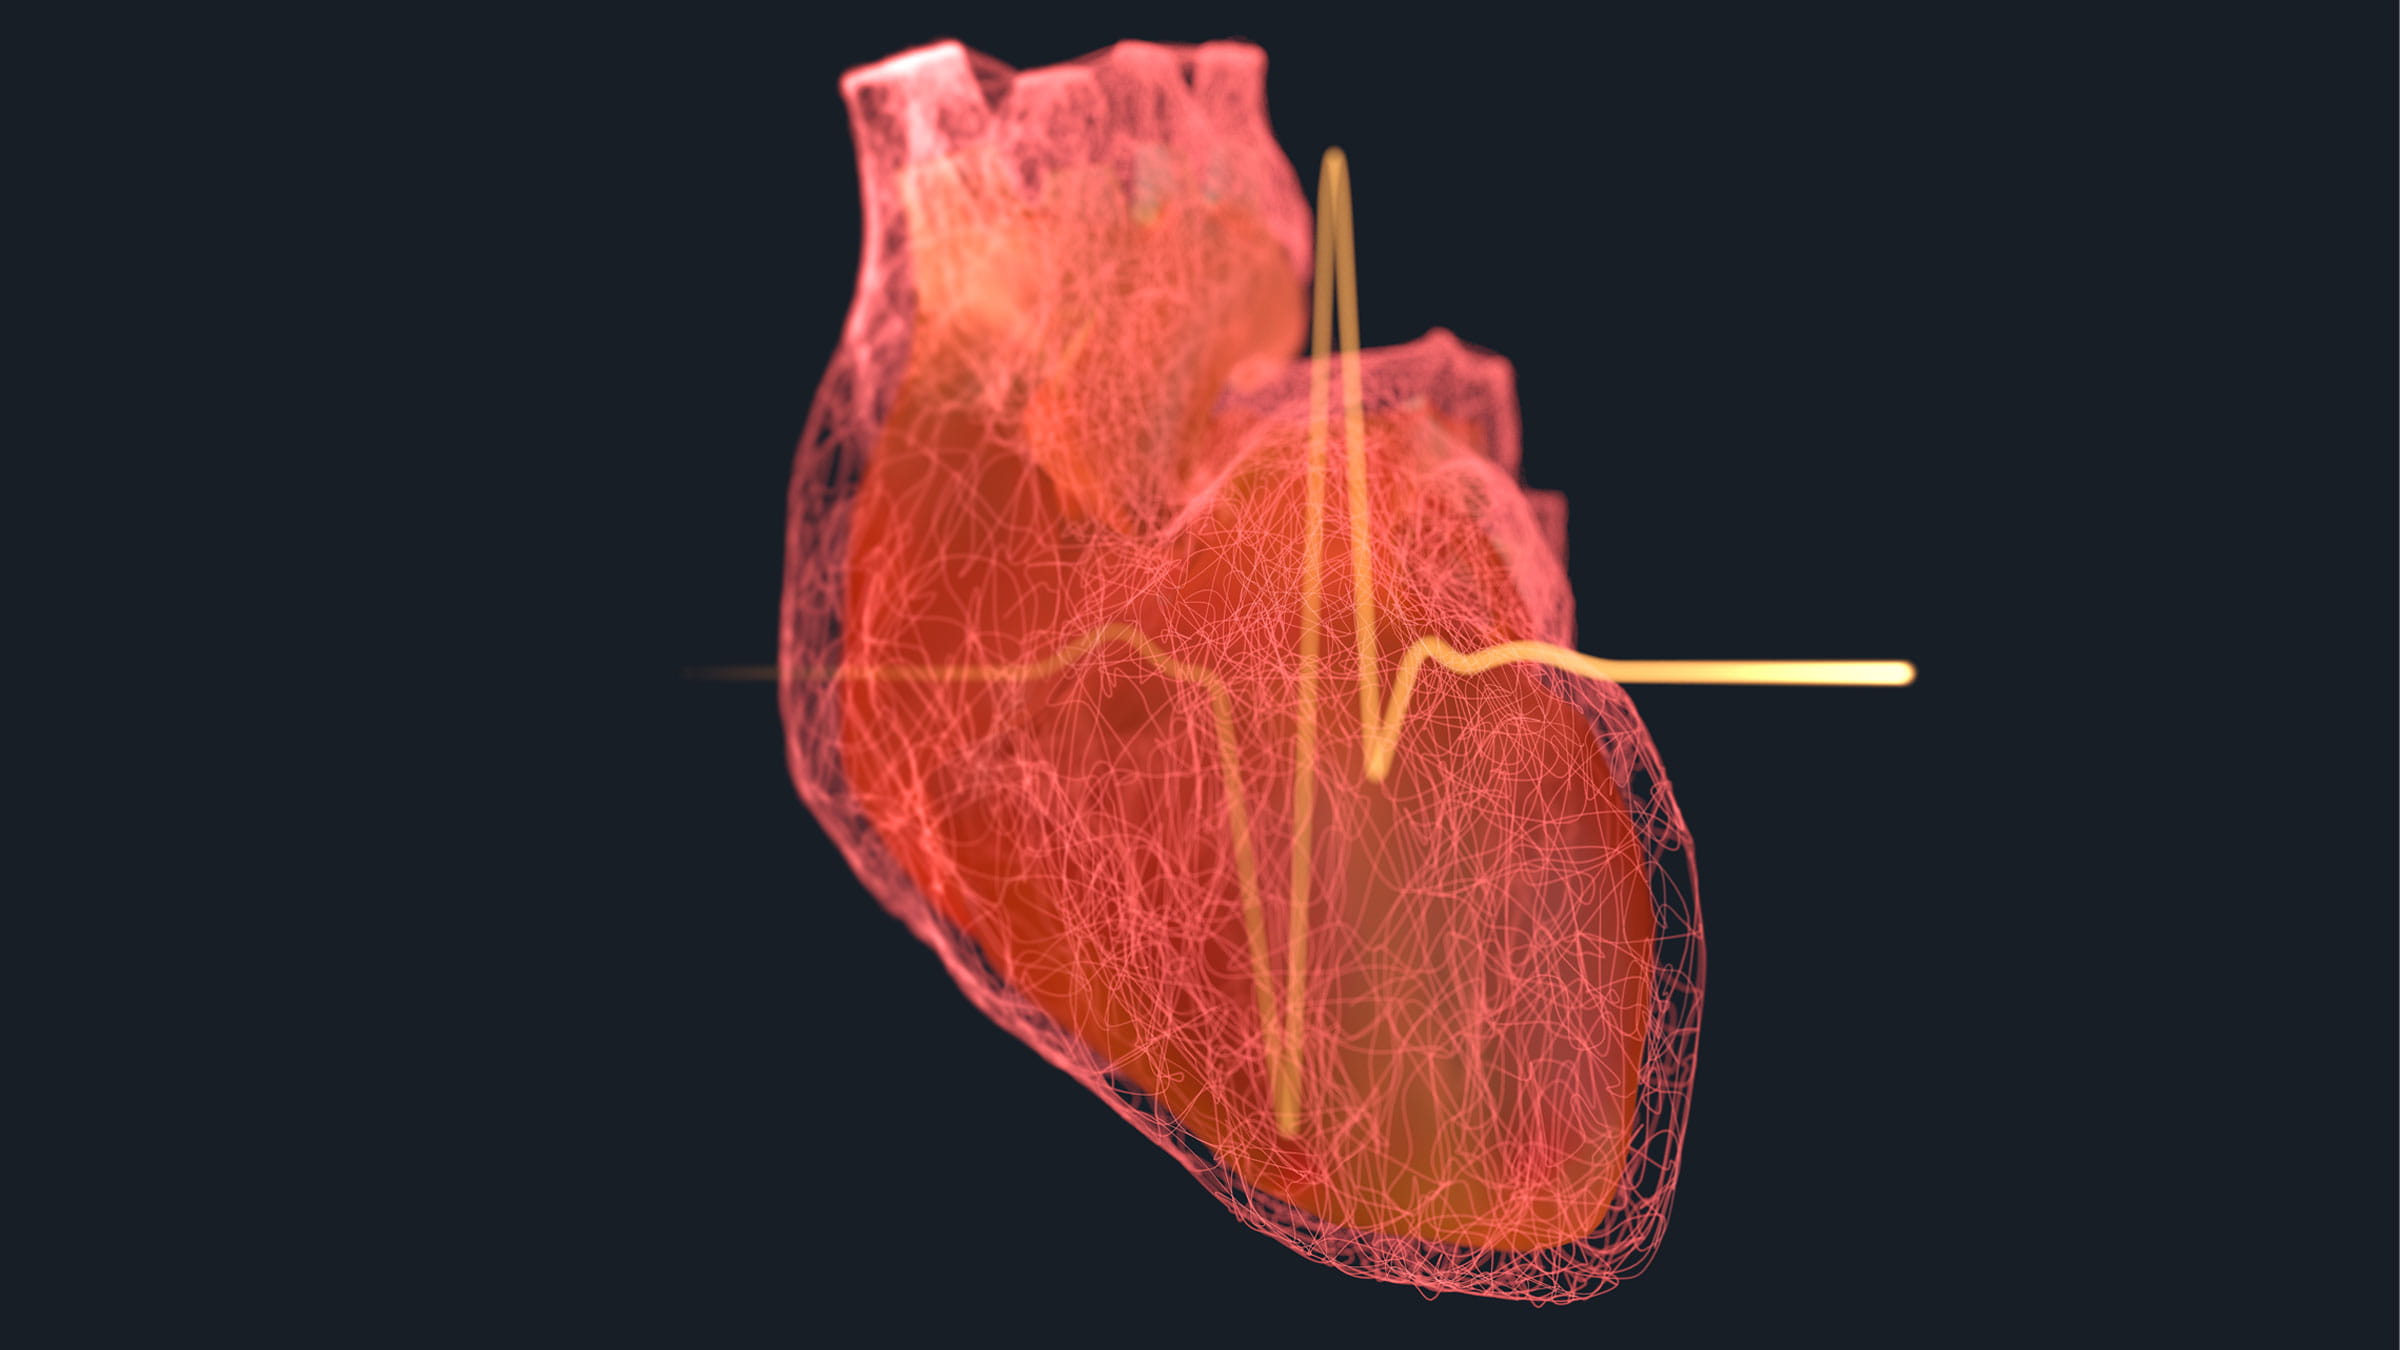 Image of the heart organ overlaid on a graph of a heartbeat